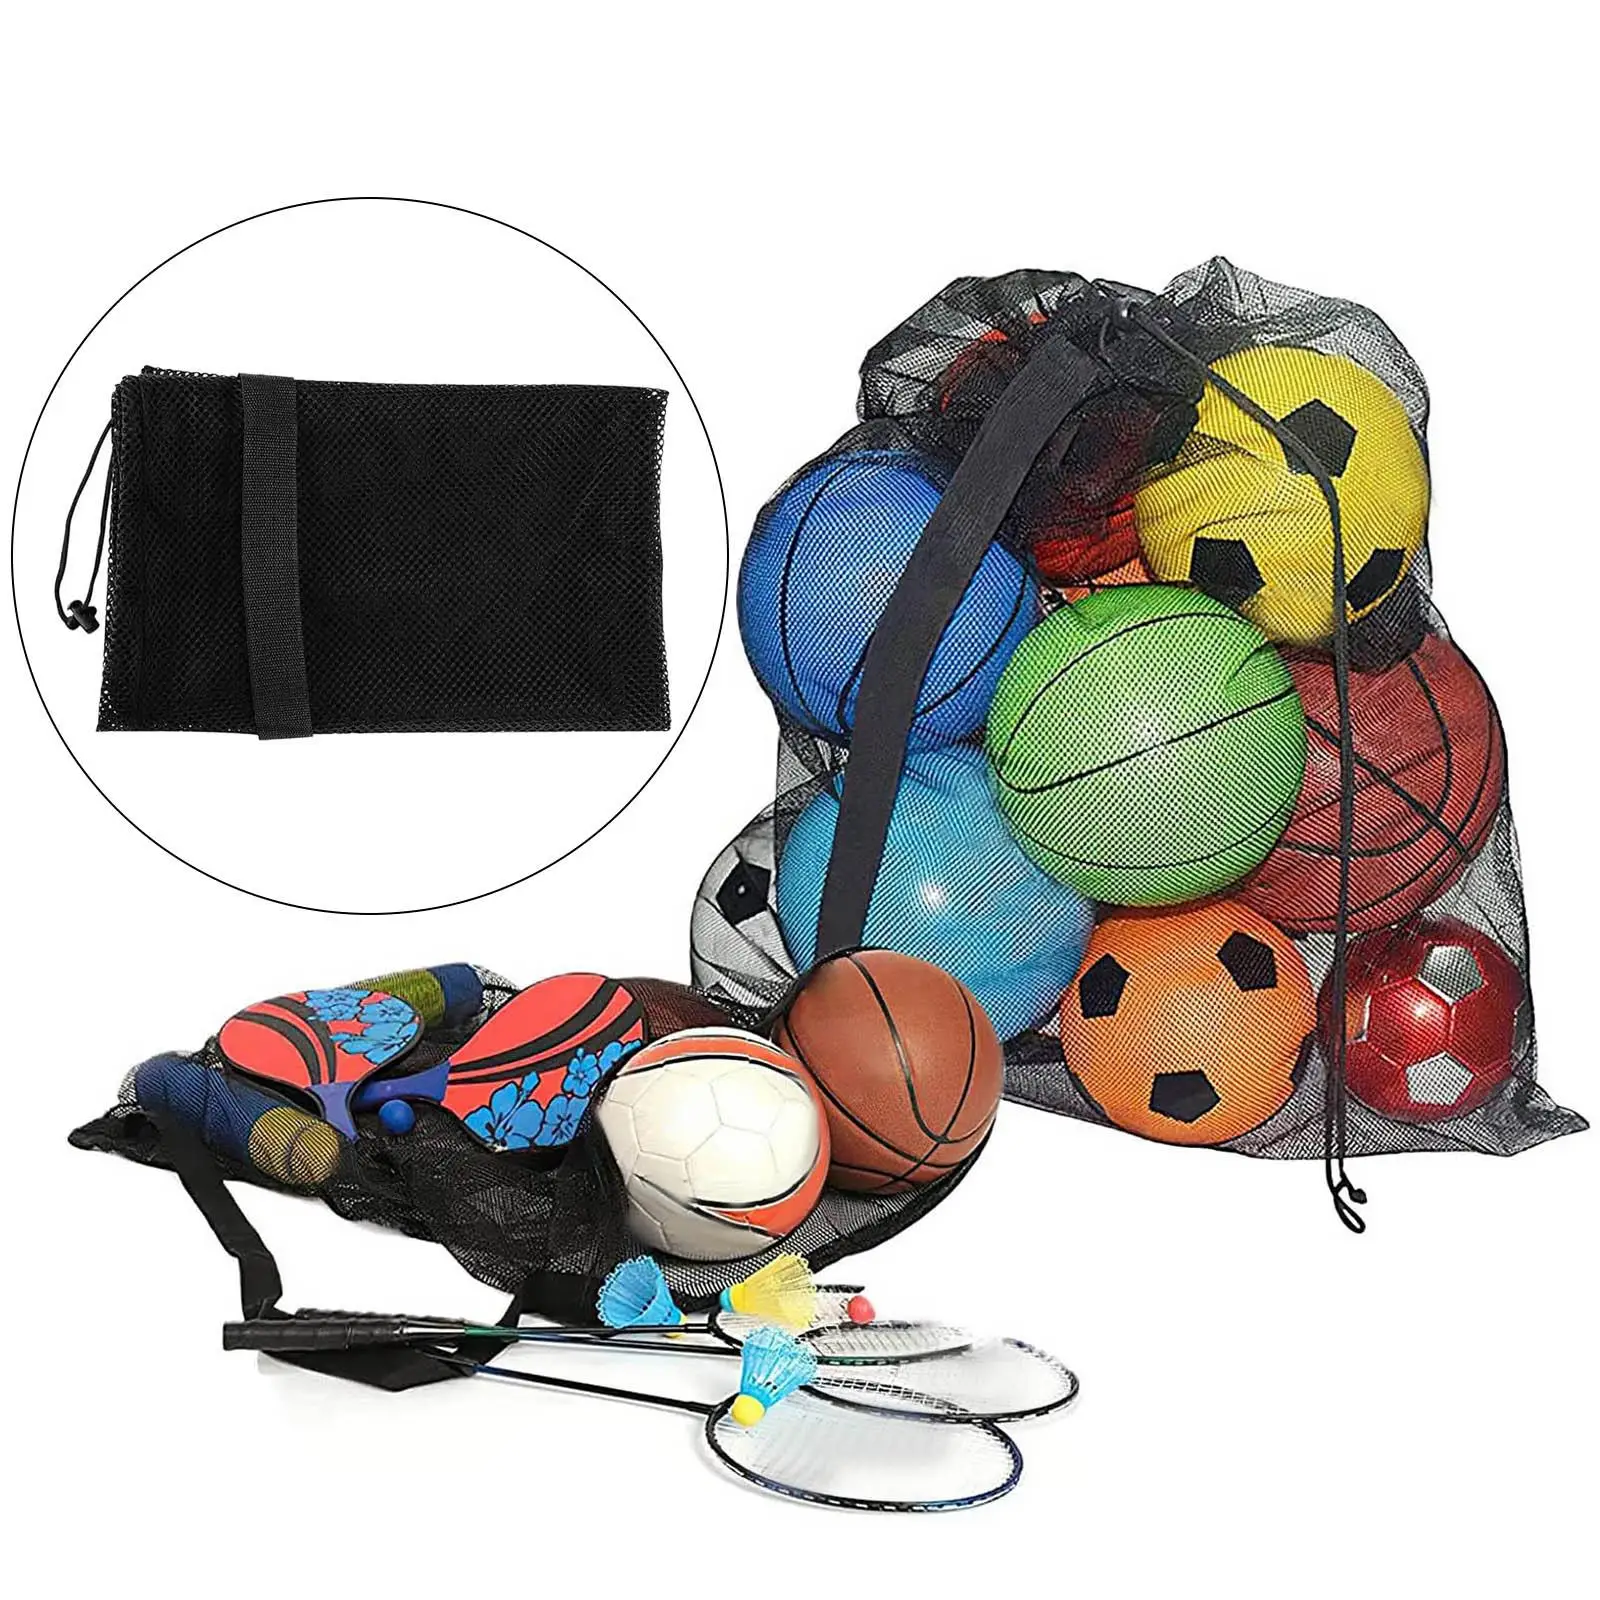 Mesh Ball Bag with Adjustable Strap Large Gym Sport Equipment Storage Hold 9